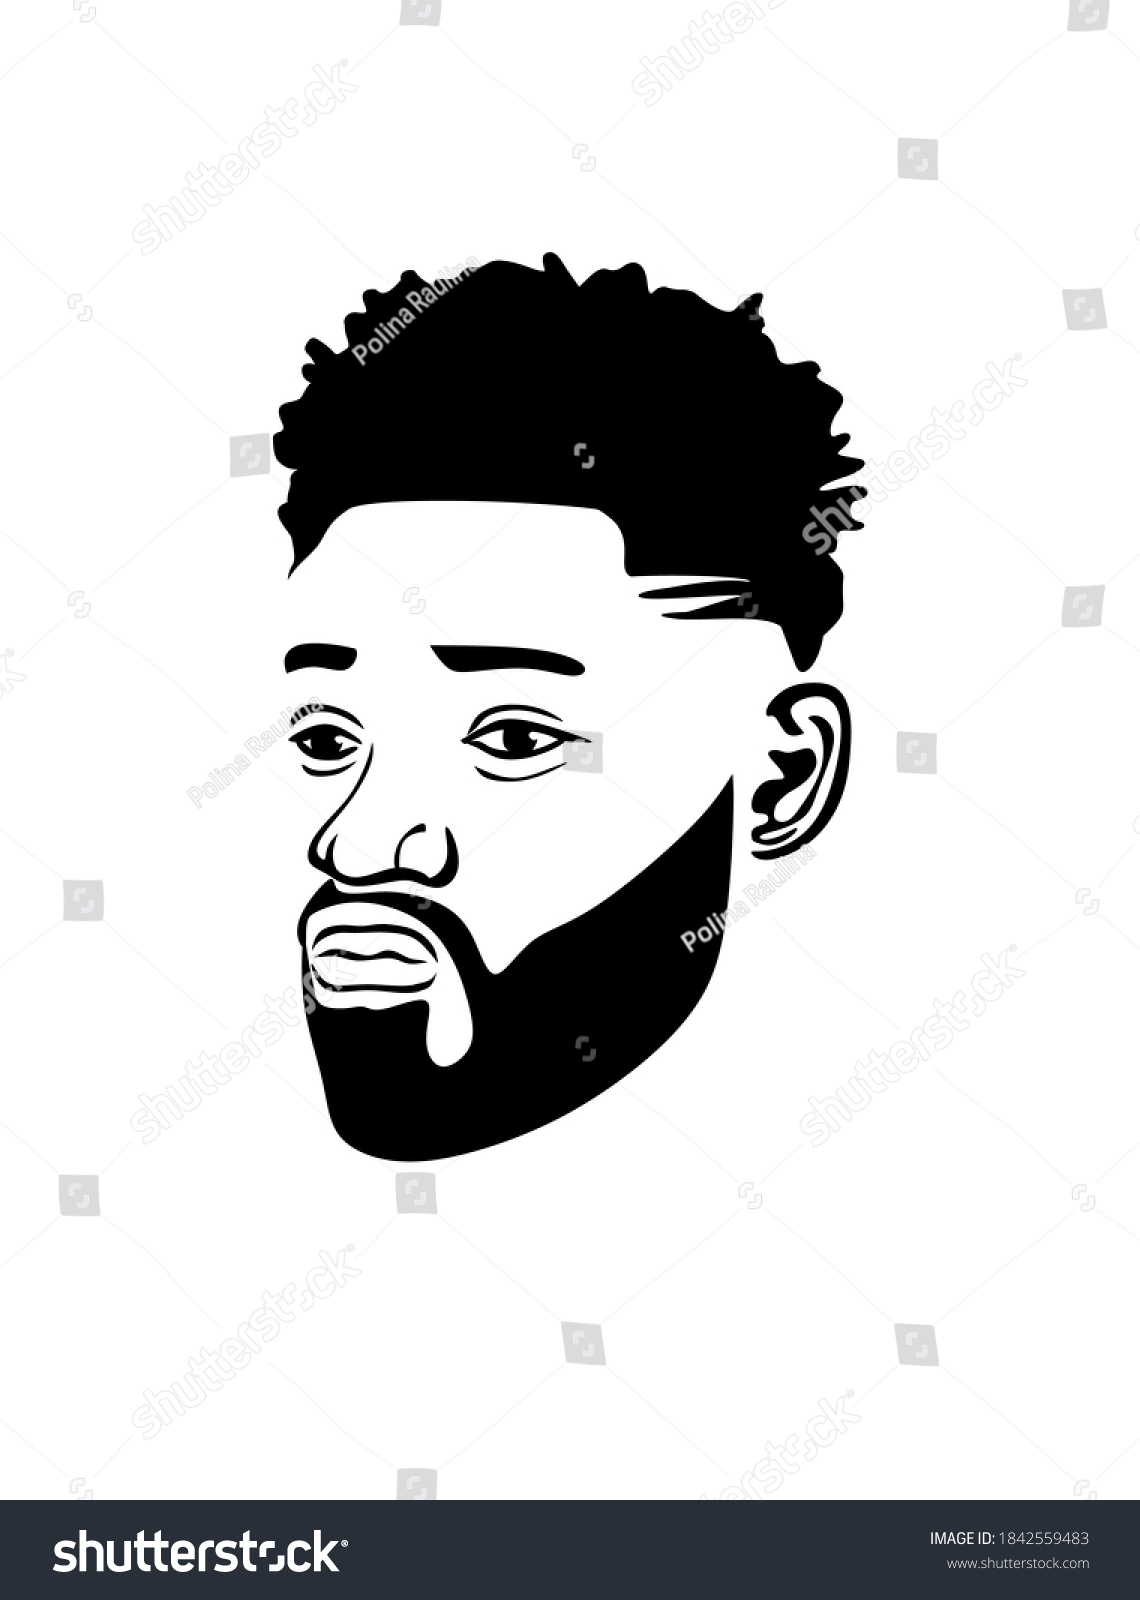 SVG of Black african american afro male face portrait vector silhouette with curls hairstyle and beard.Man head drawing from the side with isolated on white background.Wall sticker vinyl decal .T shirt print svg